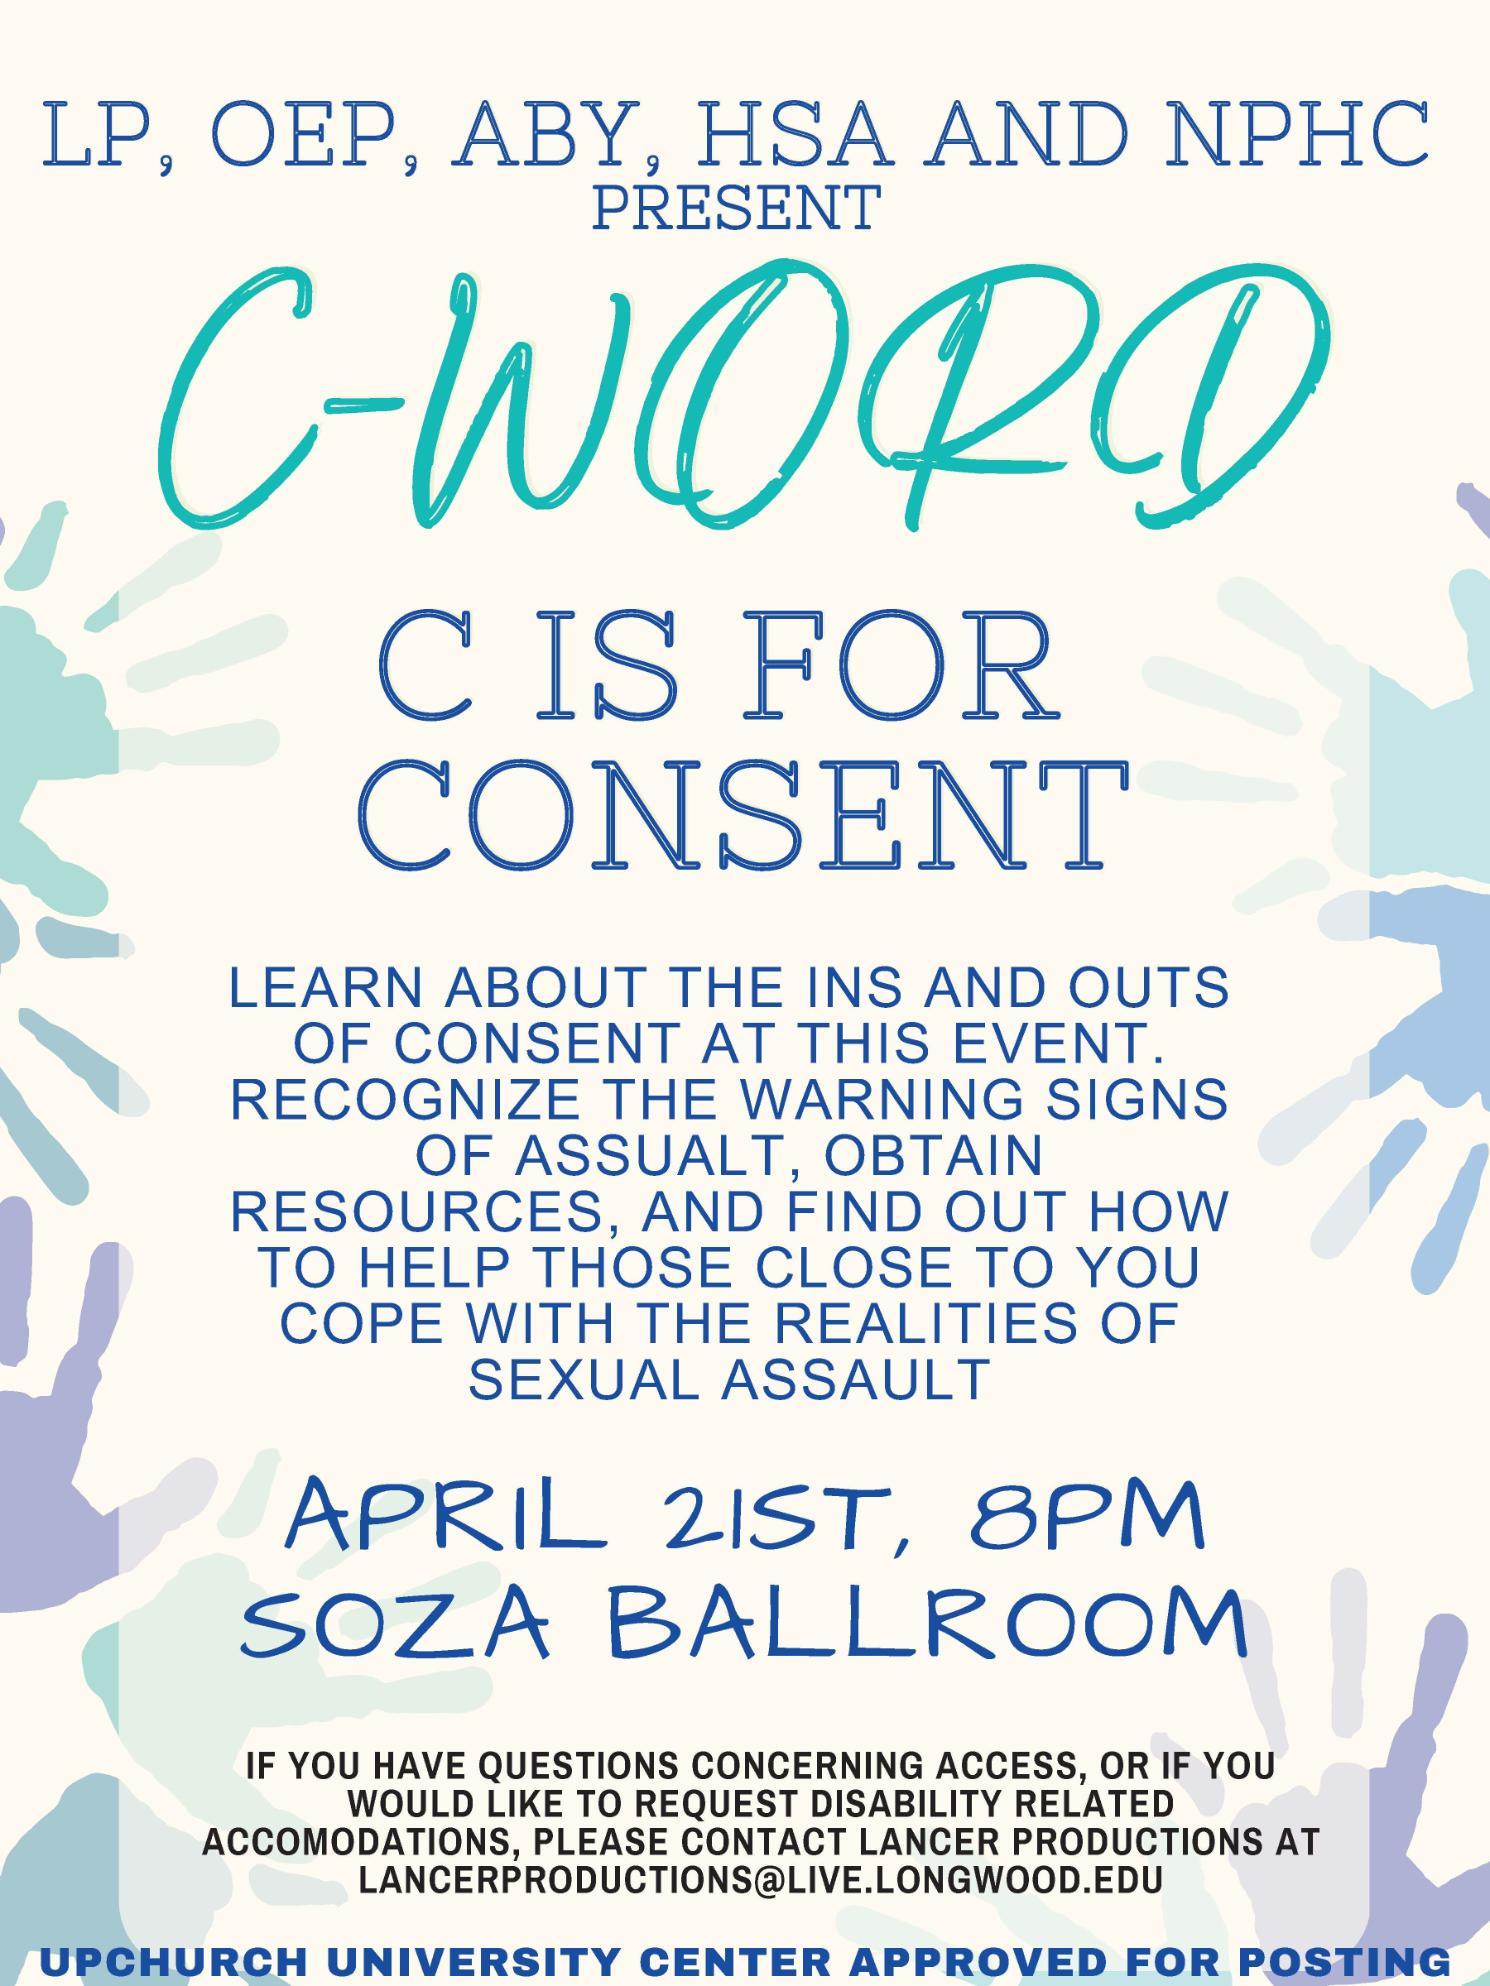 C is for Consent flyer